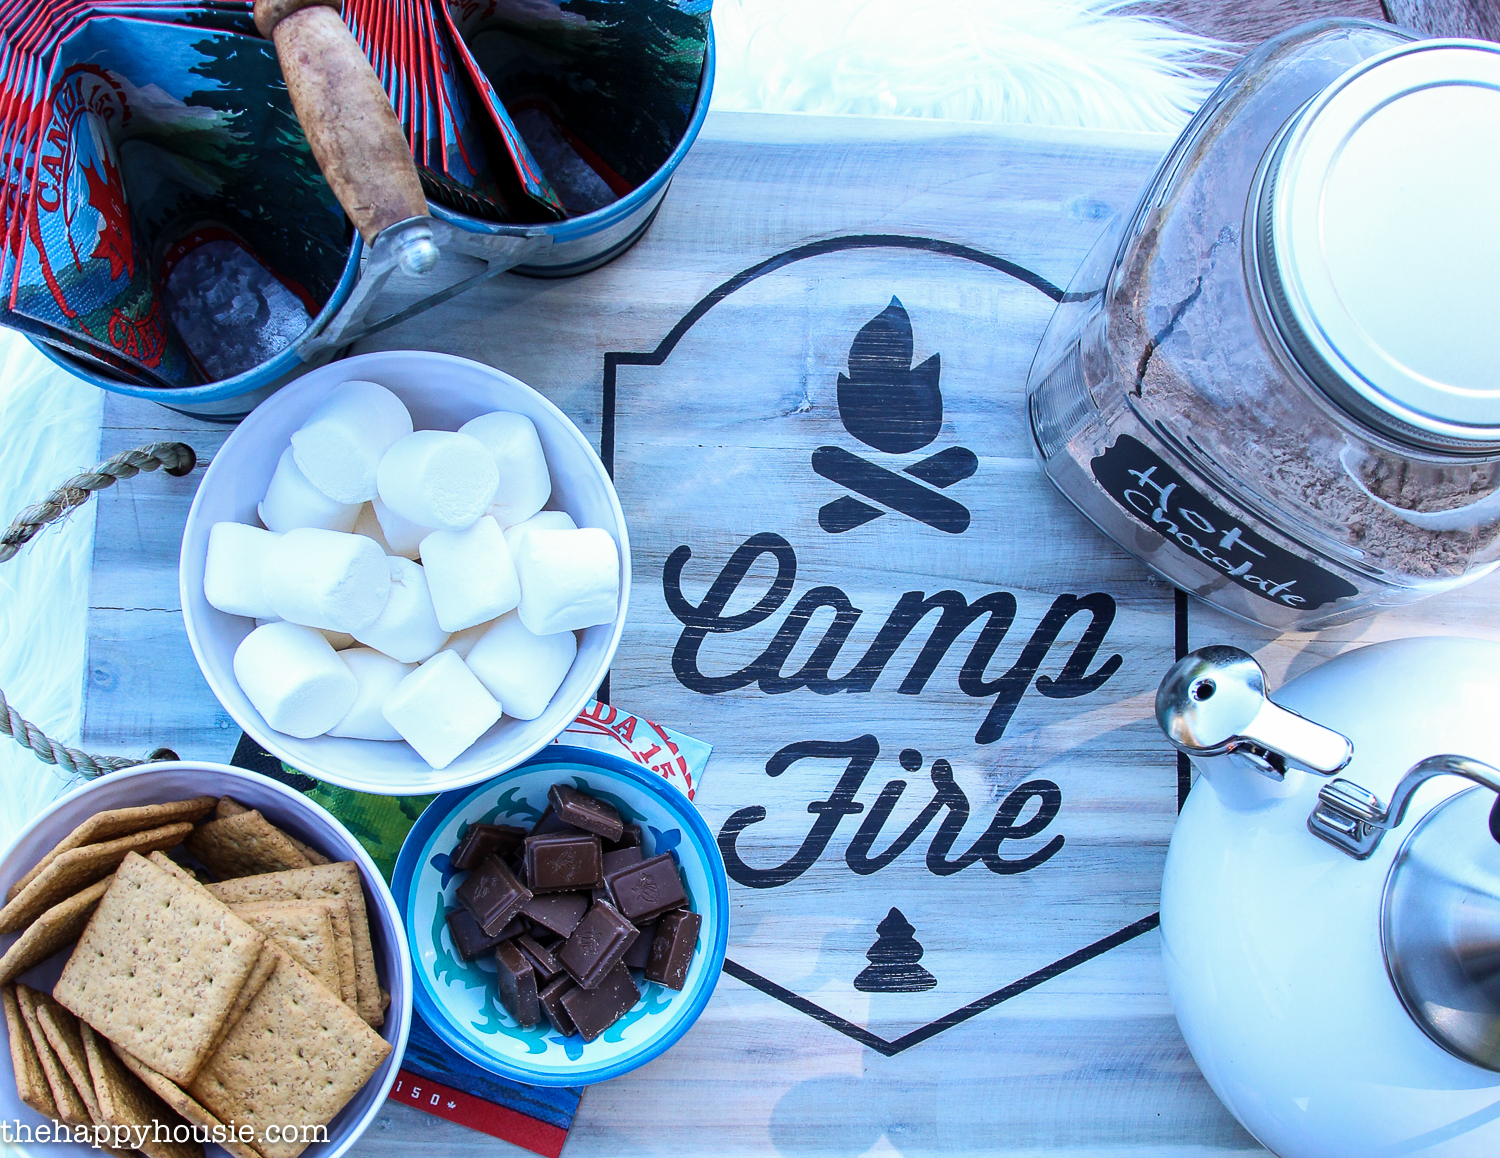 A s'more station is set up.